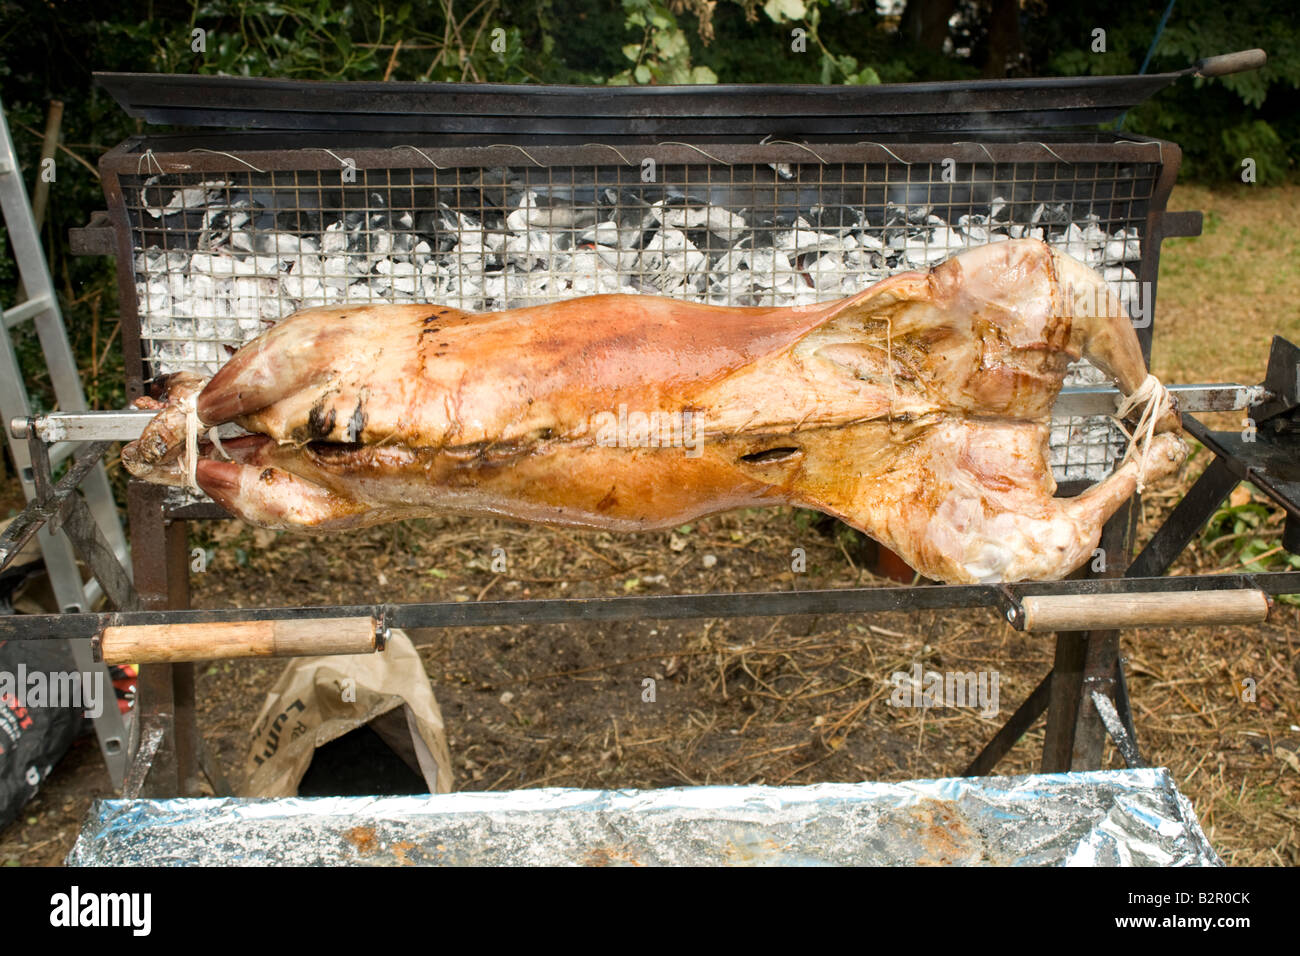 Full lamb carcass on spit on home made Bar B Q barbeque Yateley UK Stock Photo